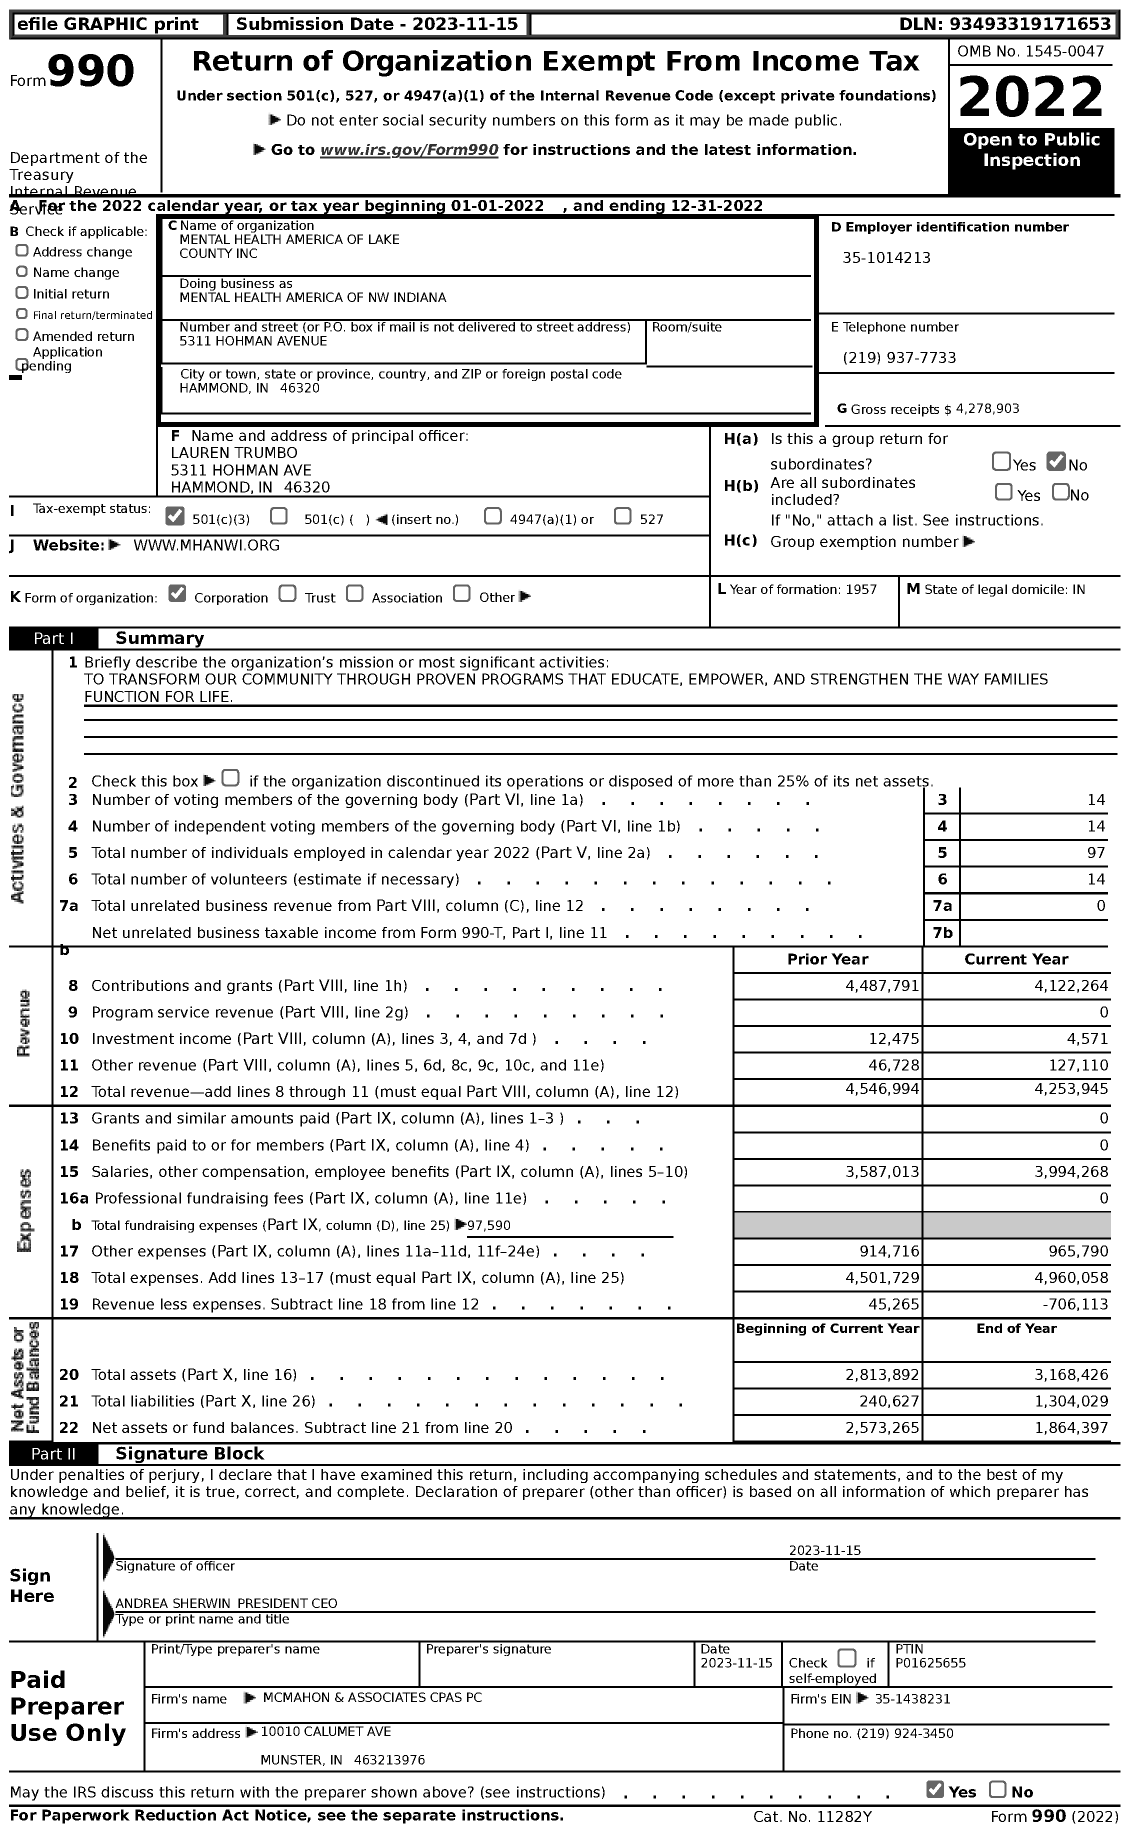 Image of first page of 2022 Form 990 for Mental Health America of NW Indiana